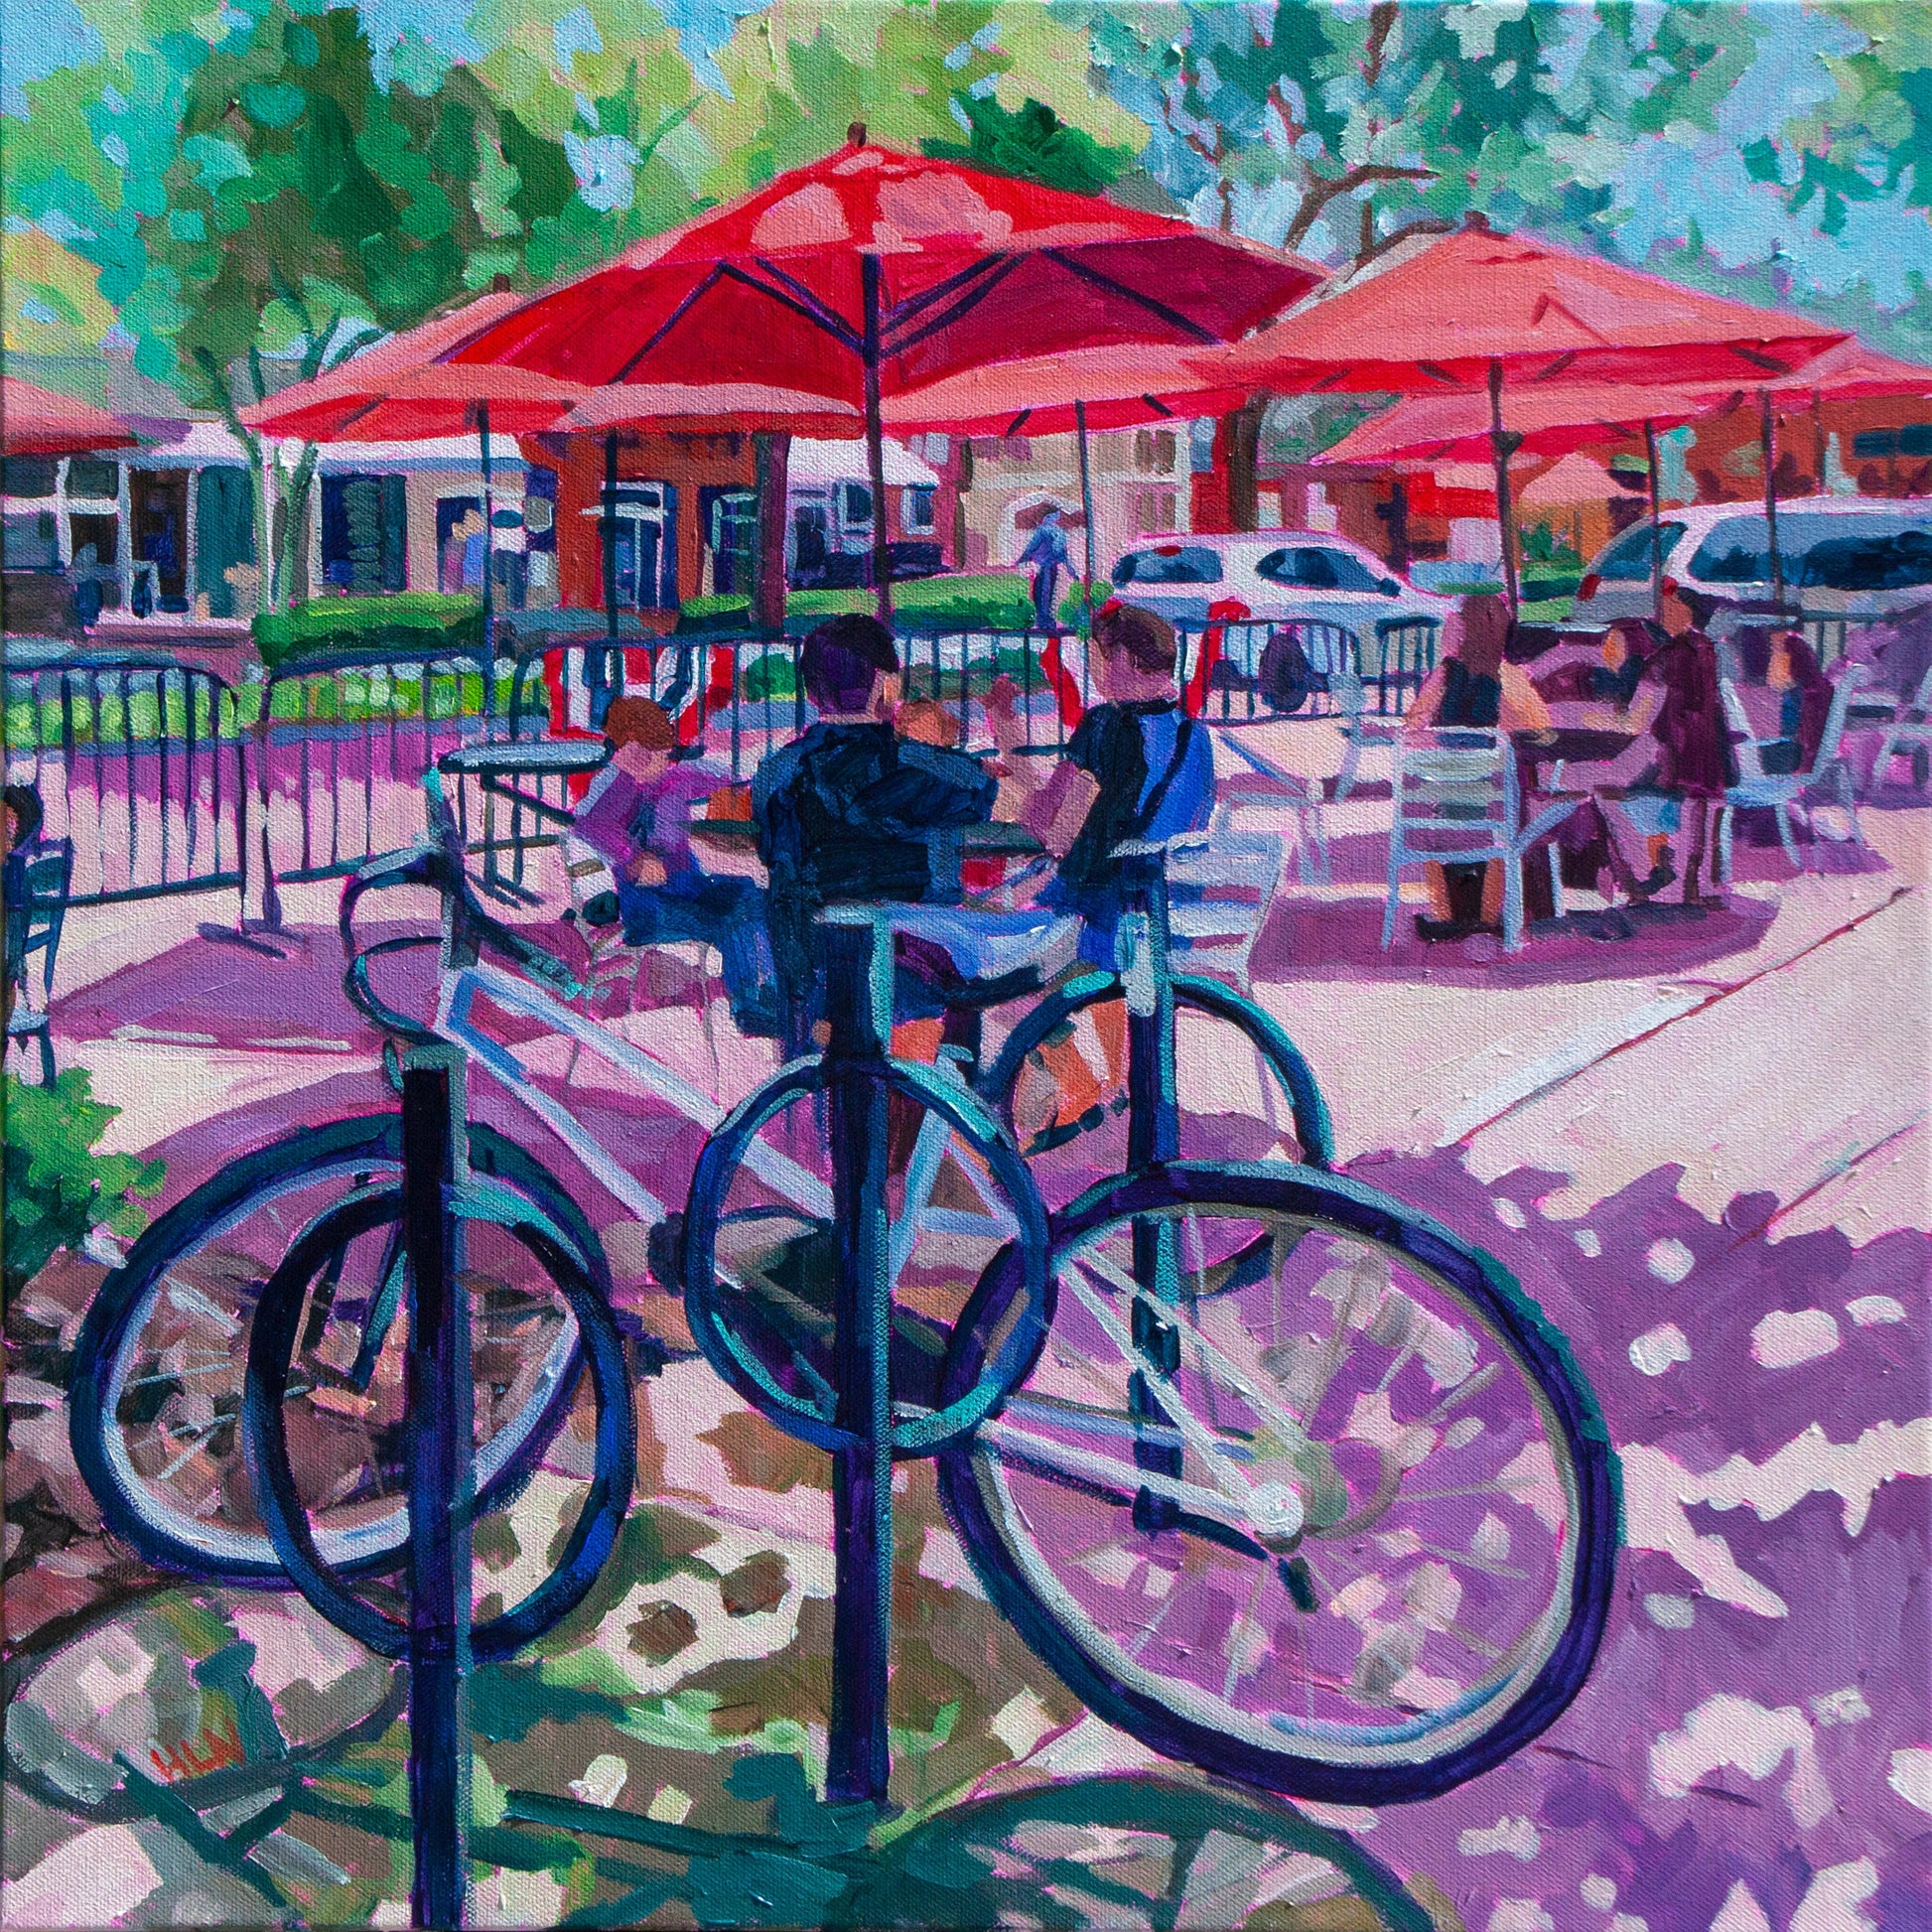 Winter Garden Florida scene of street cafe with red umbrellas and bicycles in impressionistic style 